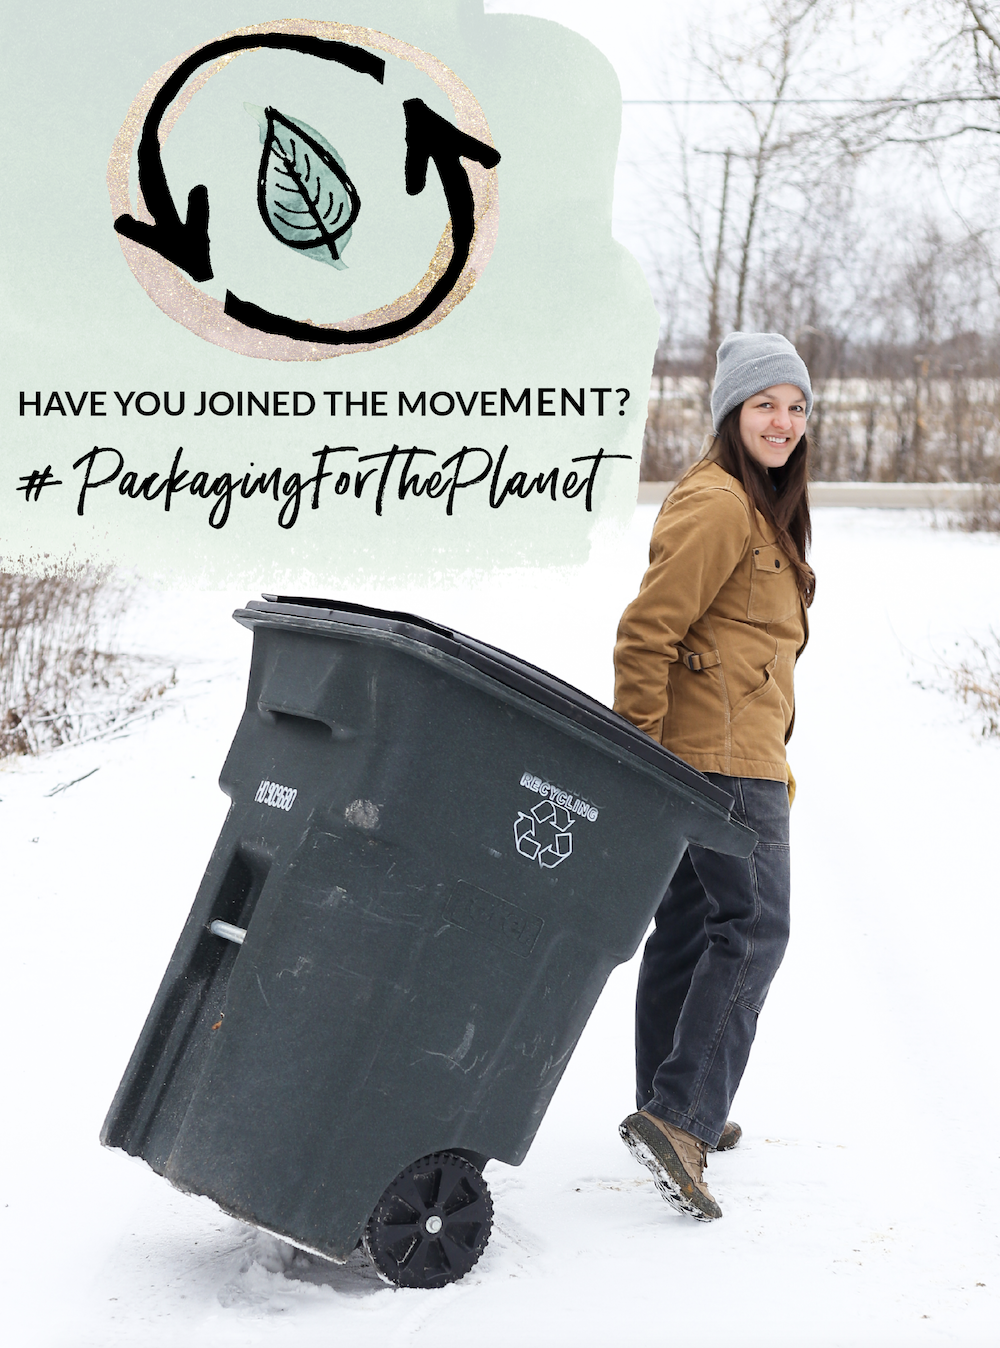 Have you joined the #PackagingForThePlanet movement? Live more sustainably in 2019